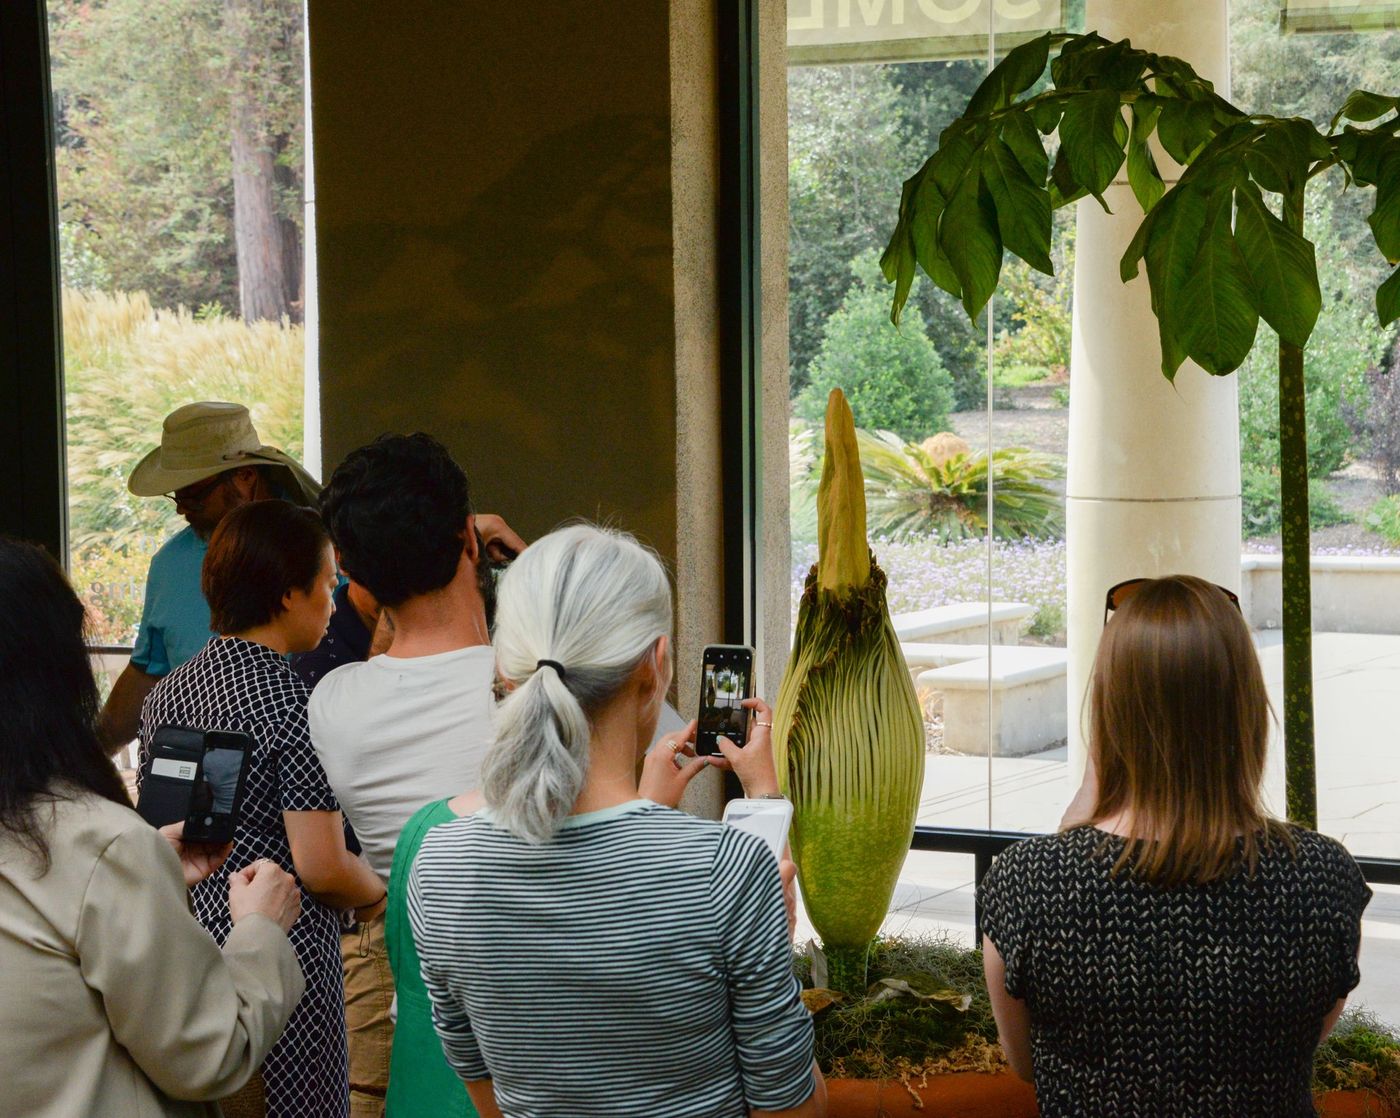 A view of the 44-inch corpse flower at Huntington Library in California.